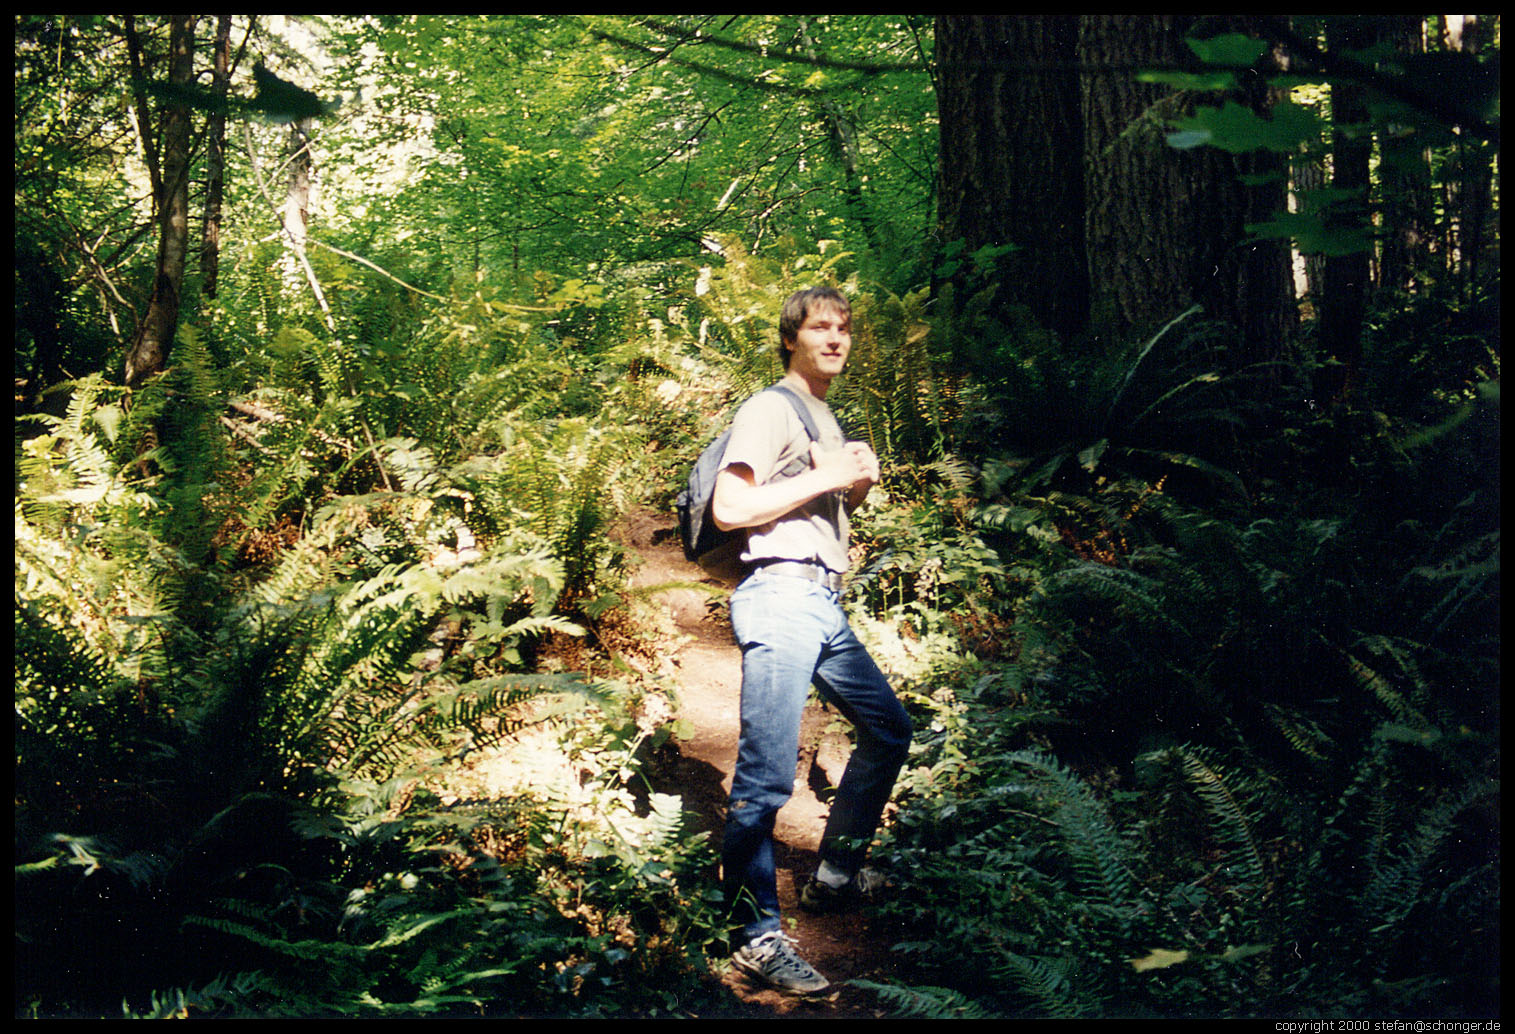 Andreas. Olympic National Park, August 2000